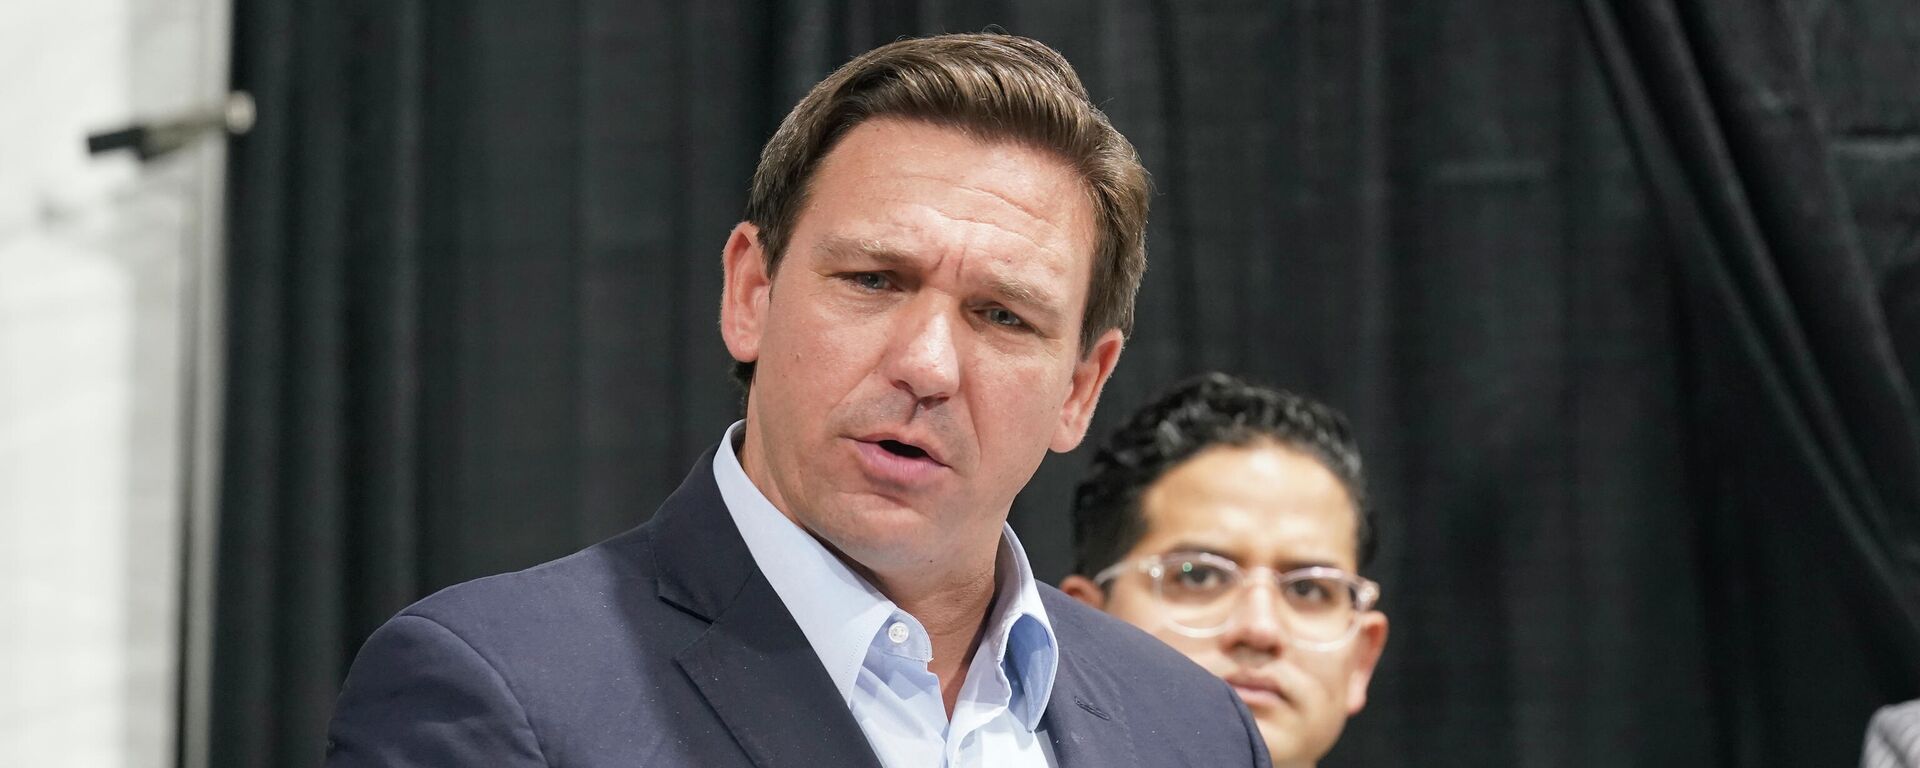 Florida Governor Ron DeSantis speaks at the opening of a monoclonal antibody site Wednesday, Aug. 18, 2021, in Pembroke Pines, Fla.  - Sputnik International, 1920, 22.10.2021